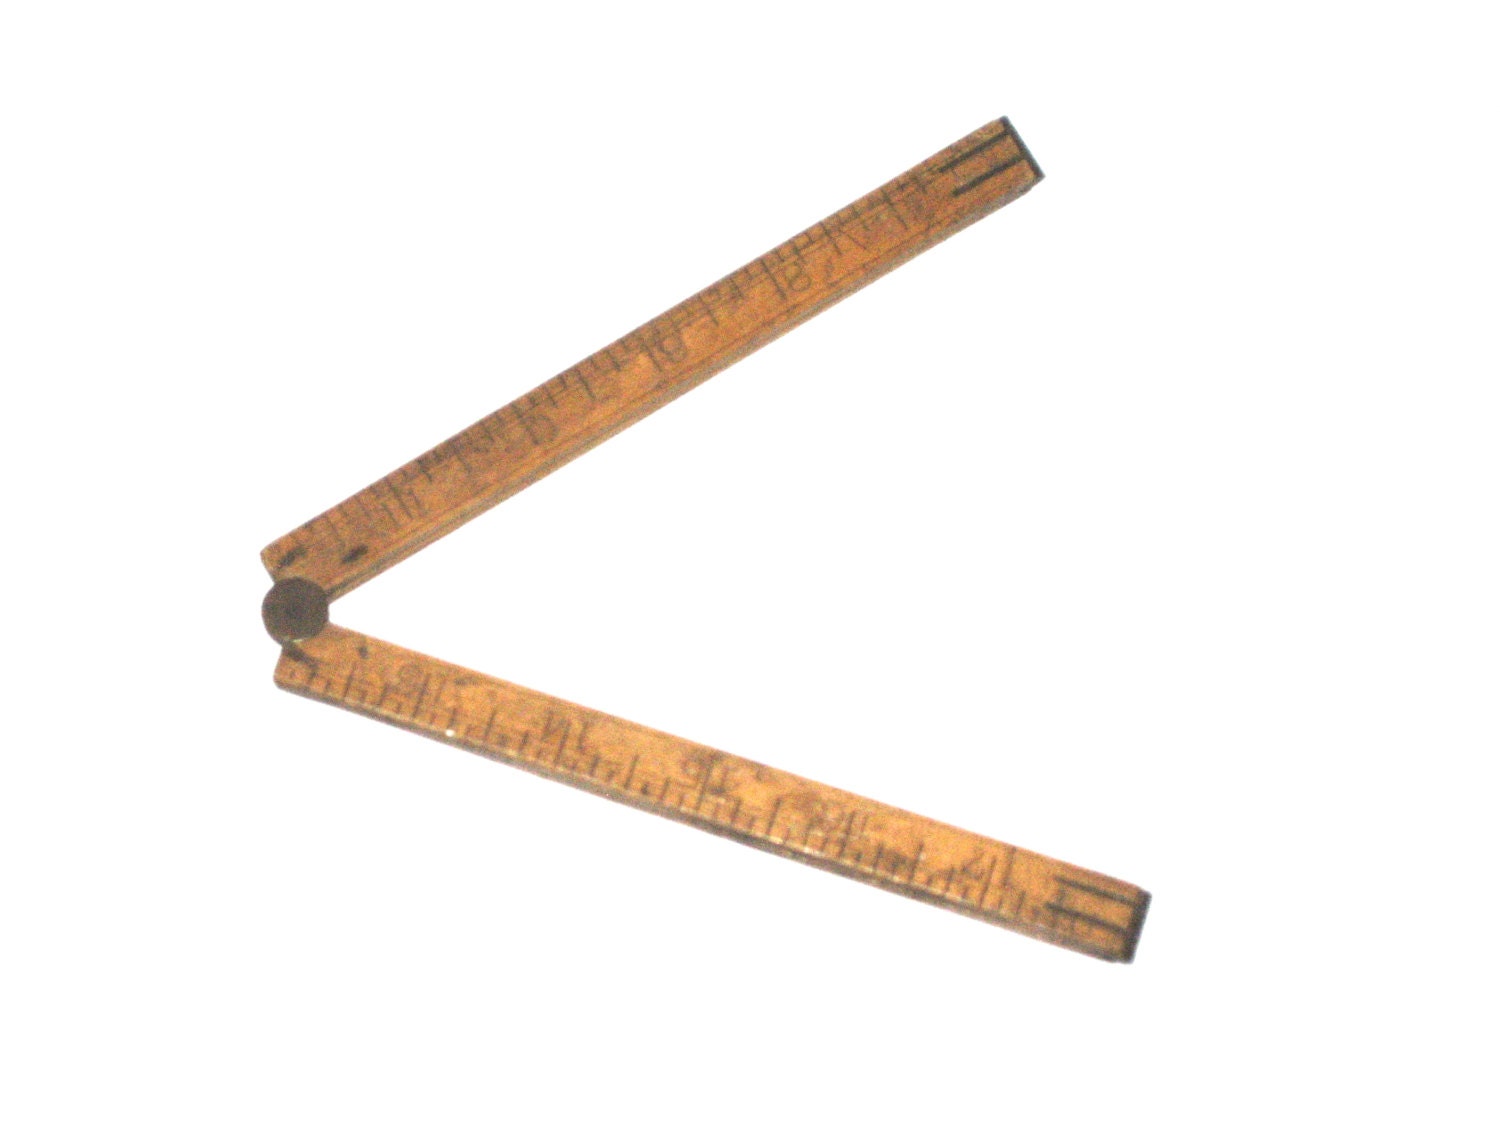 Woodworking Ruler For Sale - Best Woodworking Plan 2019